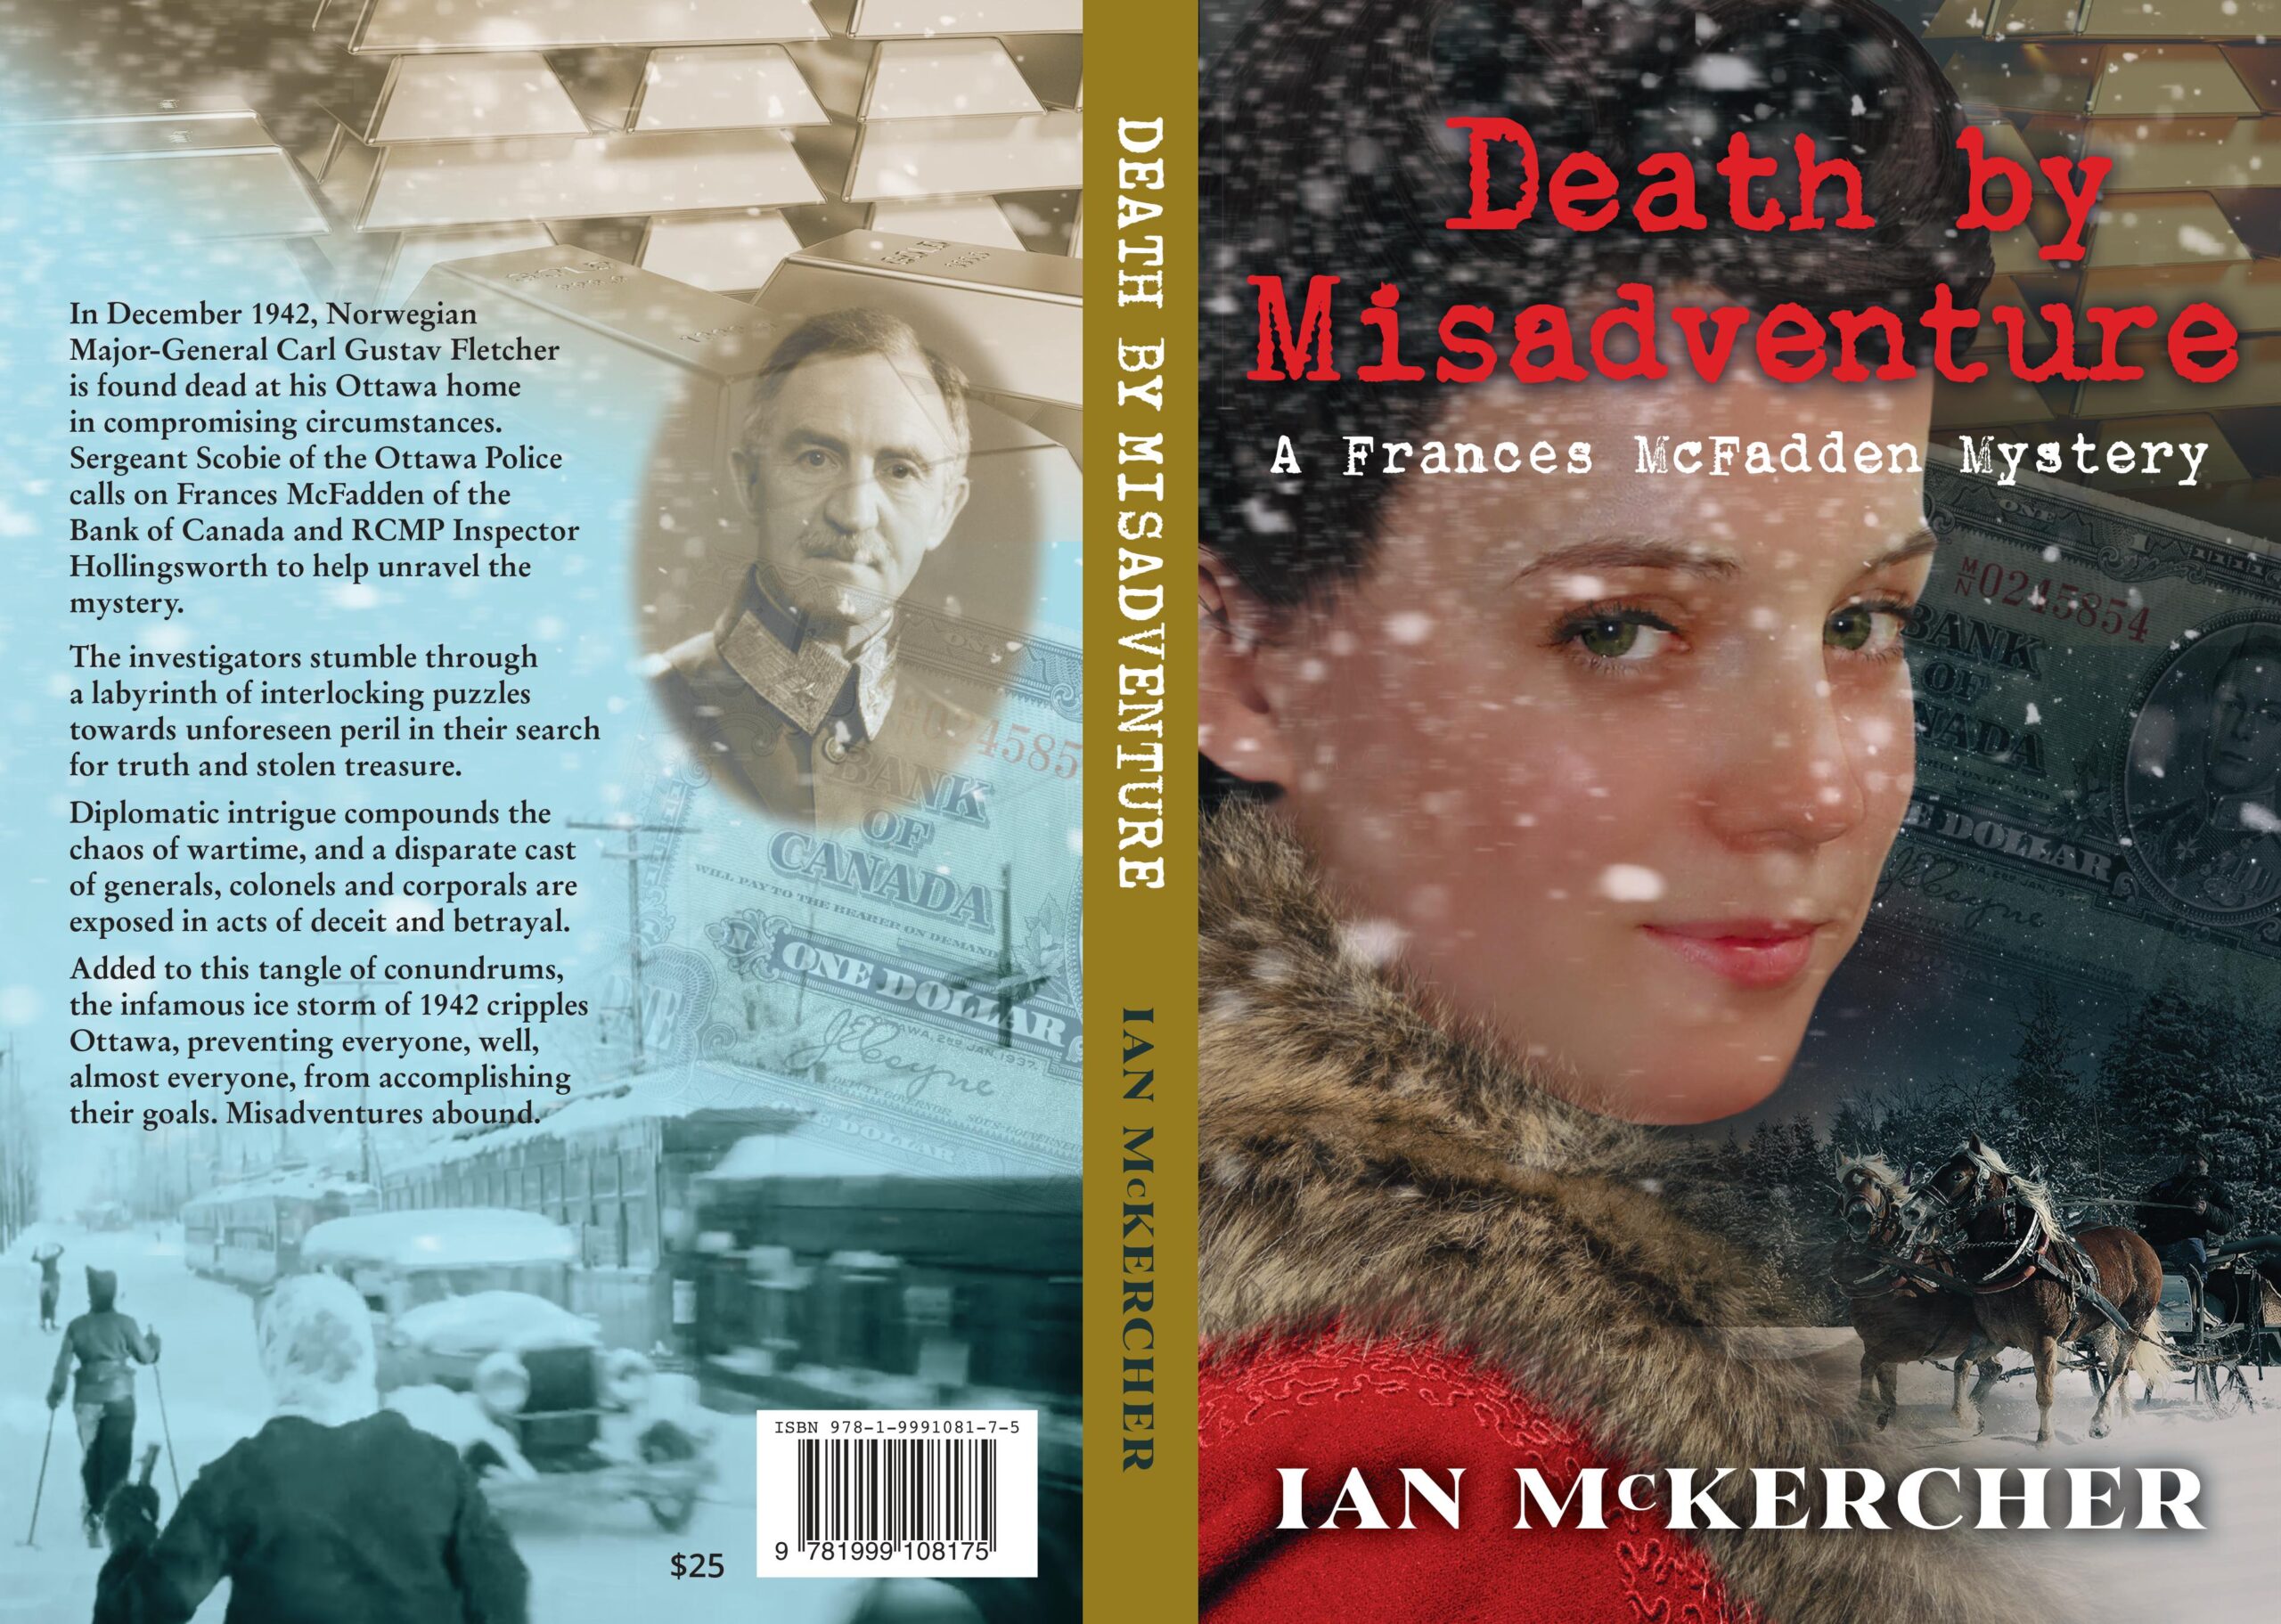 The Full Cover of Death by Misadventure